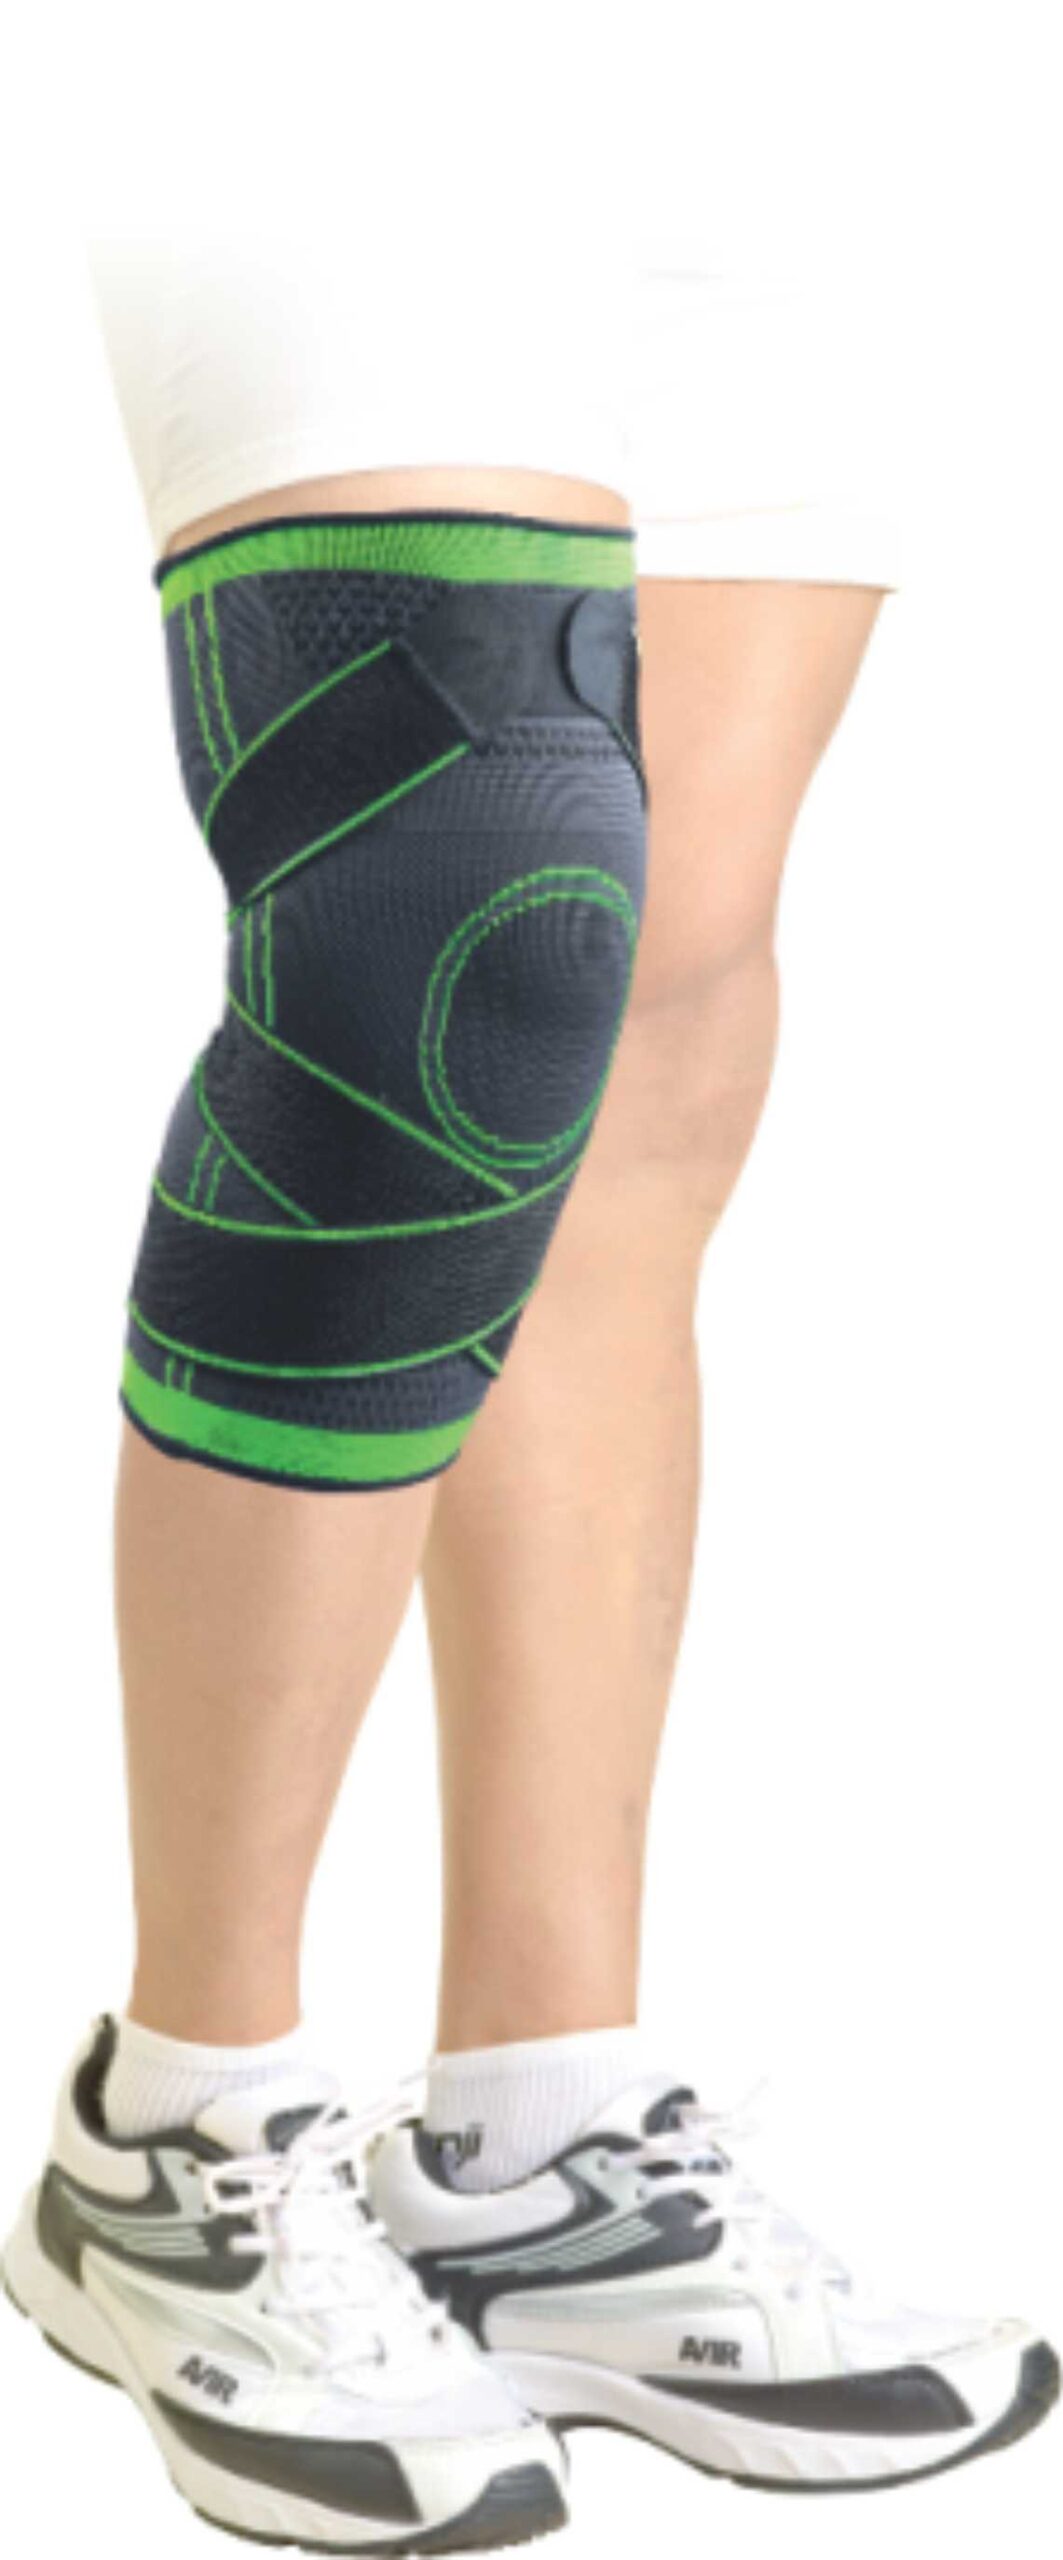 Dyna Pro Knee Support With Strap - Dynamic Techno Medicals